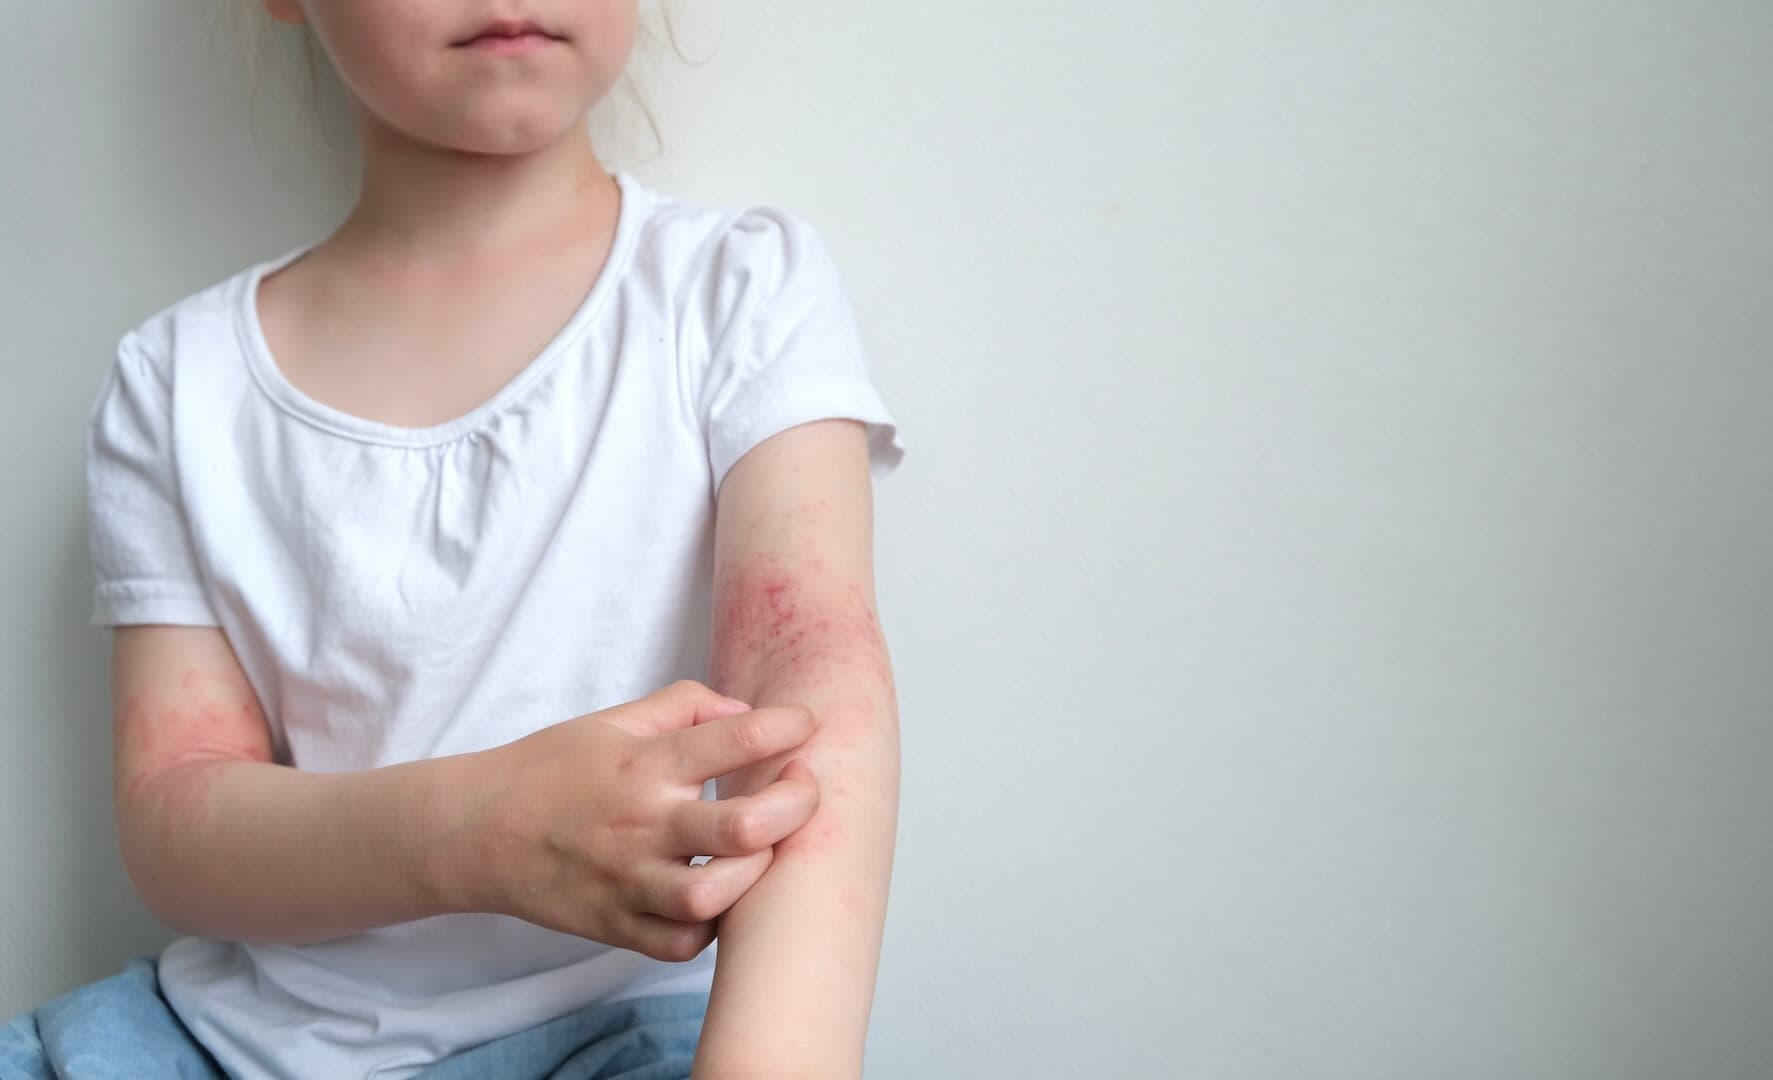 Female white child in a white top, with redness on her inner elbow, scratching herself due to apparent discomfort